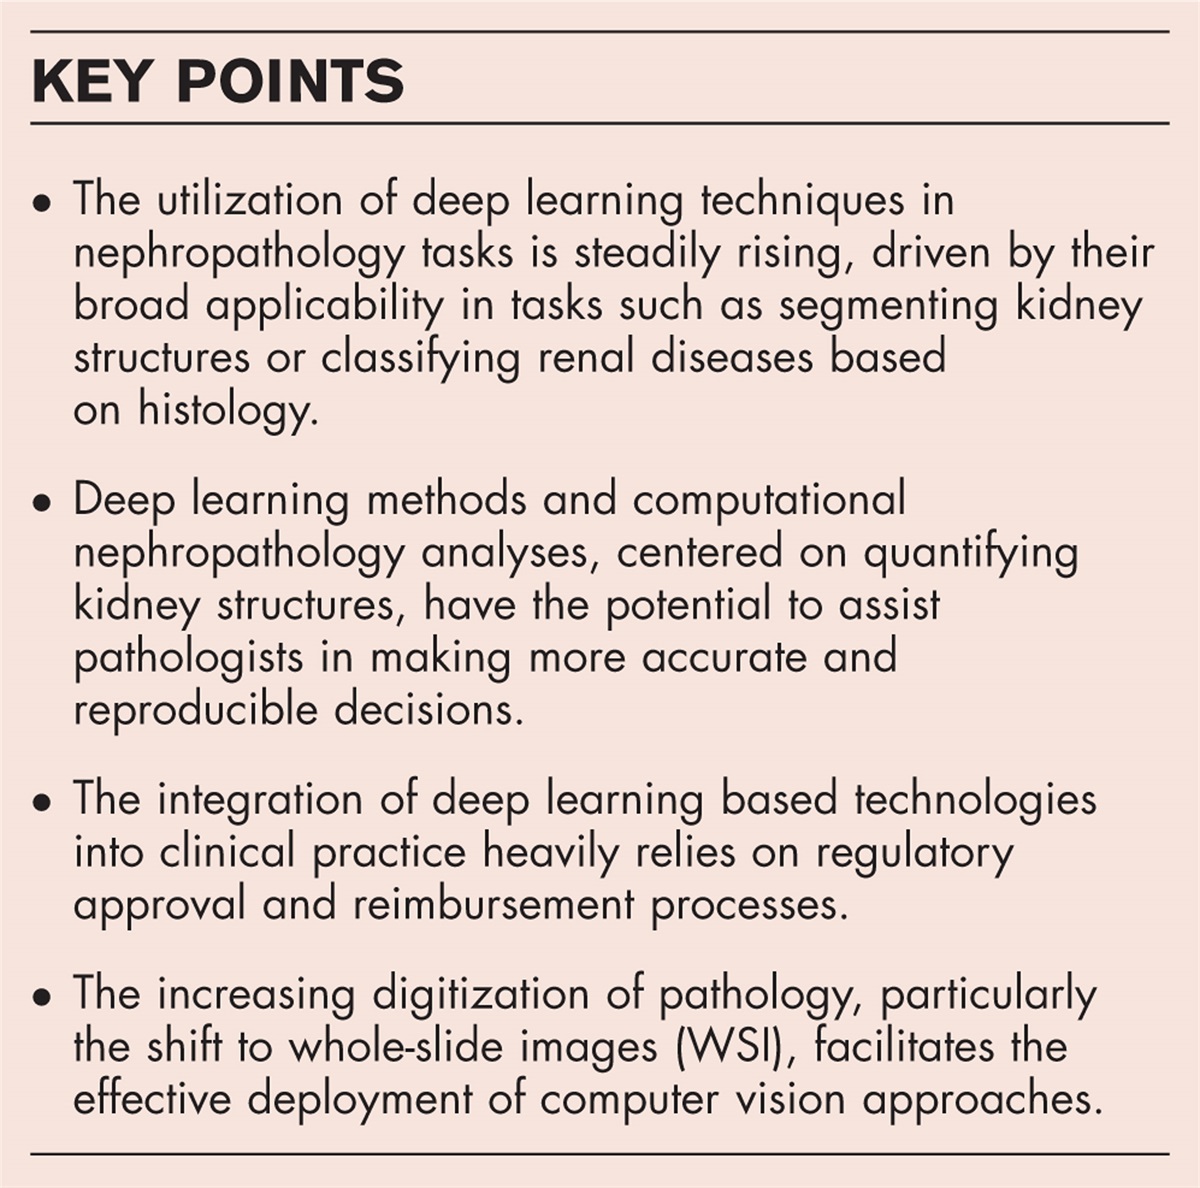 Deep learning applications for kidney histology analysis